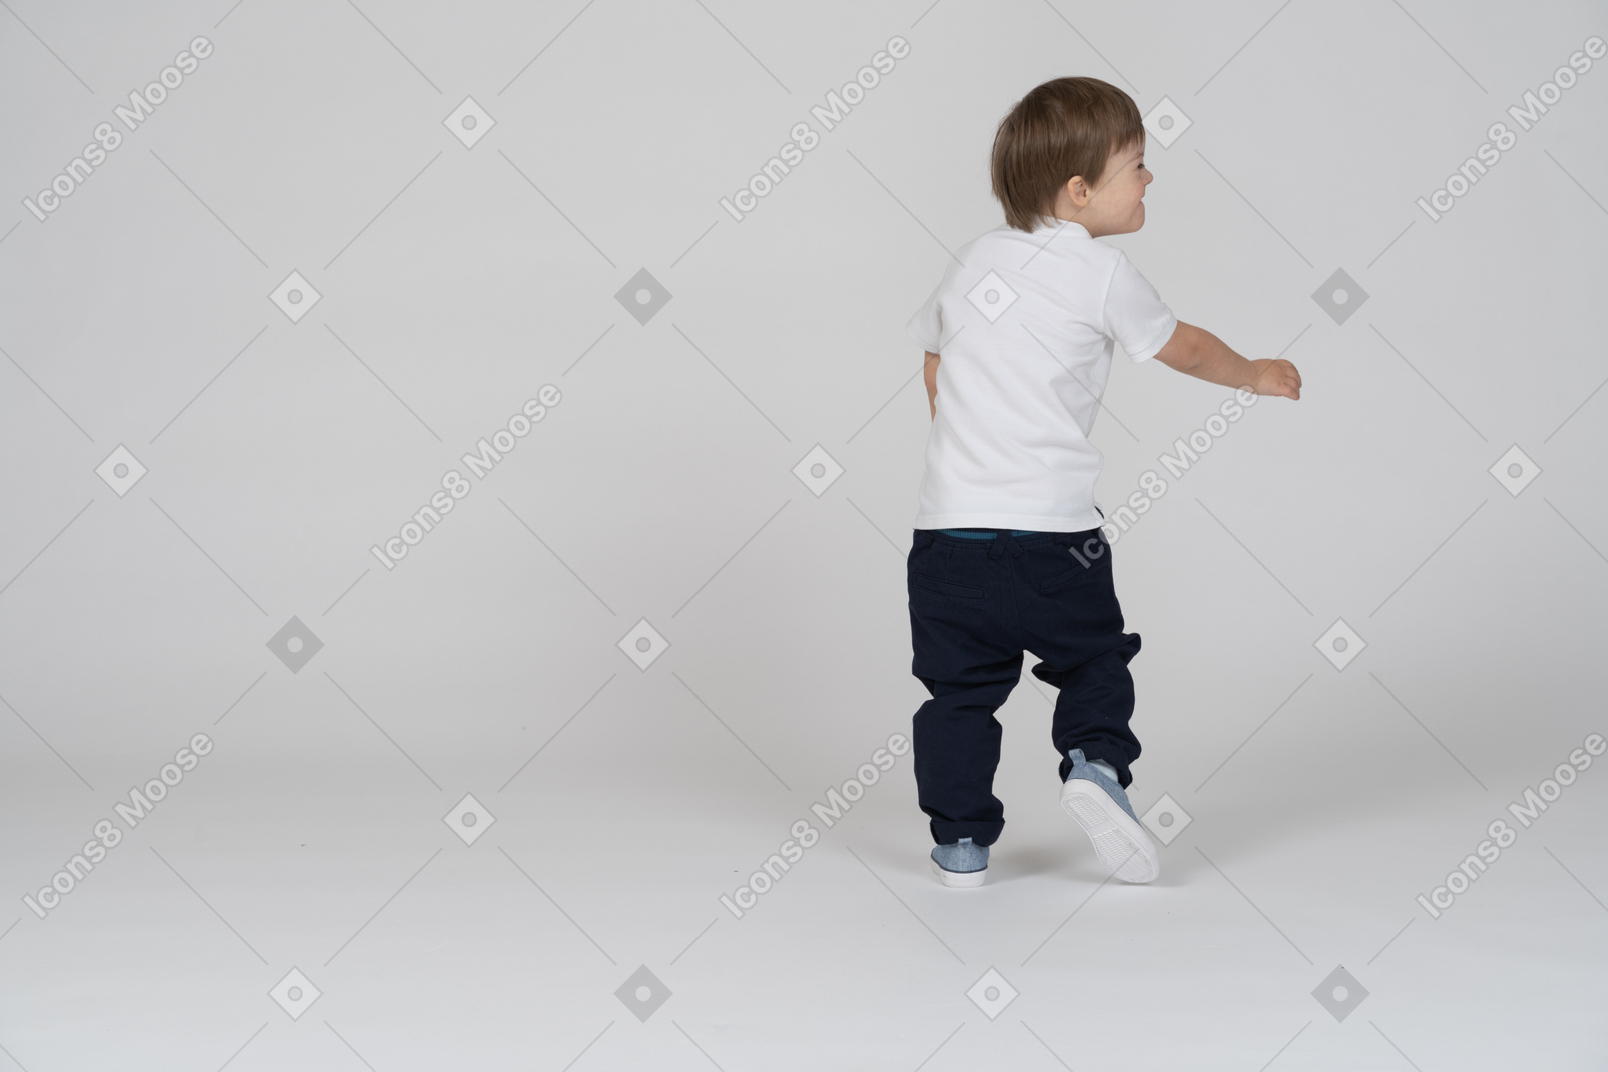 Back view of a boy stepping forward and smiling to the side